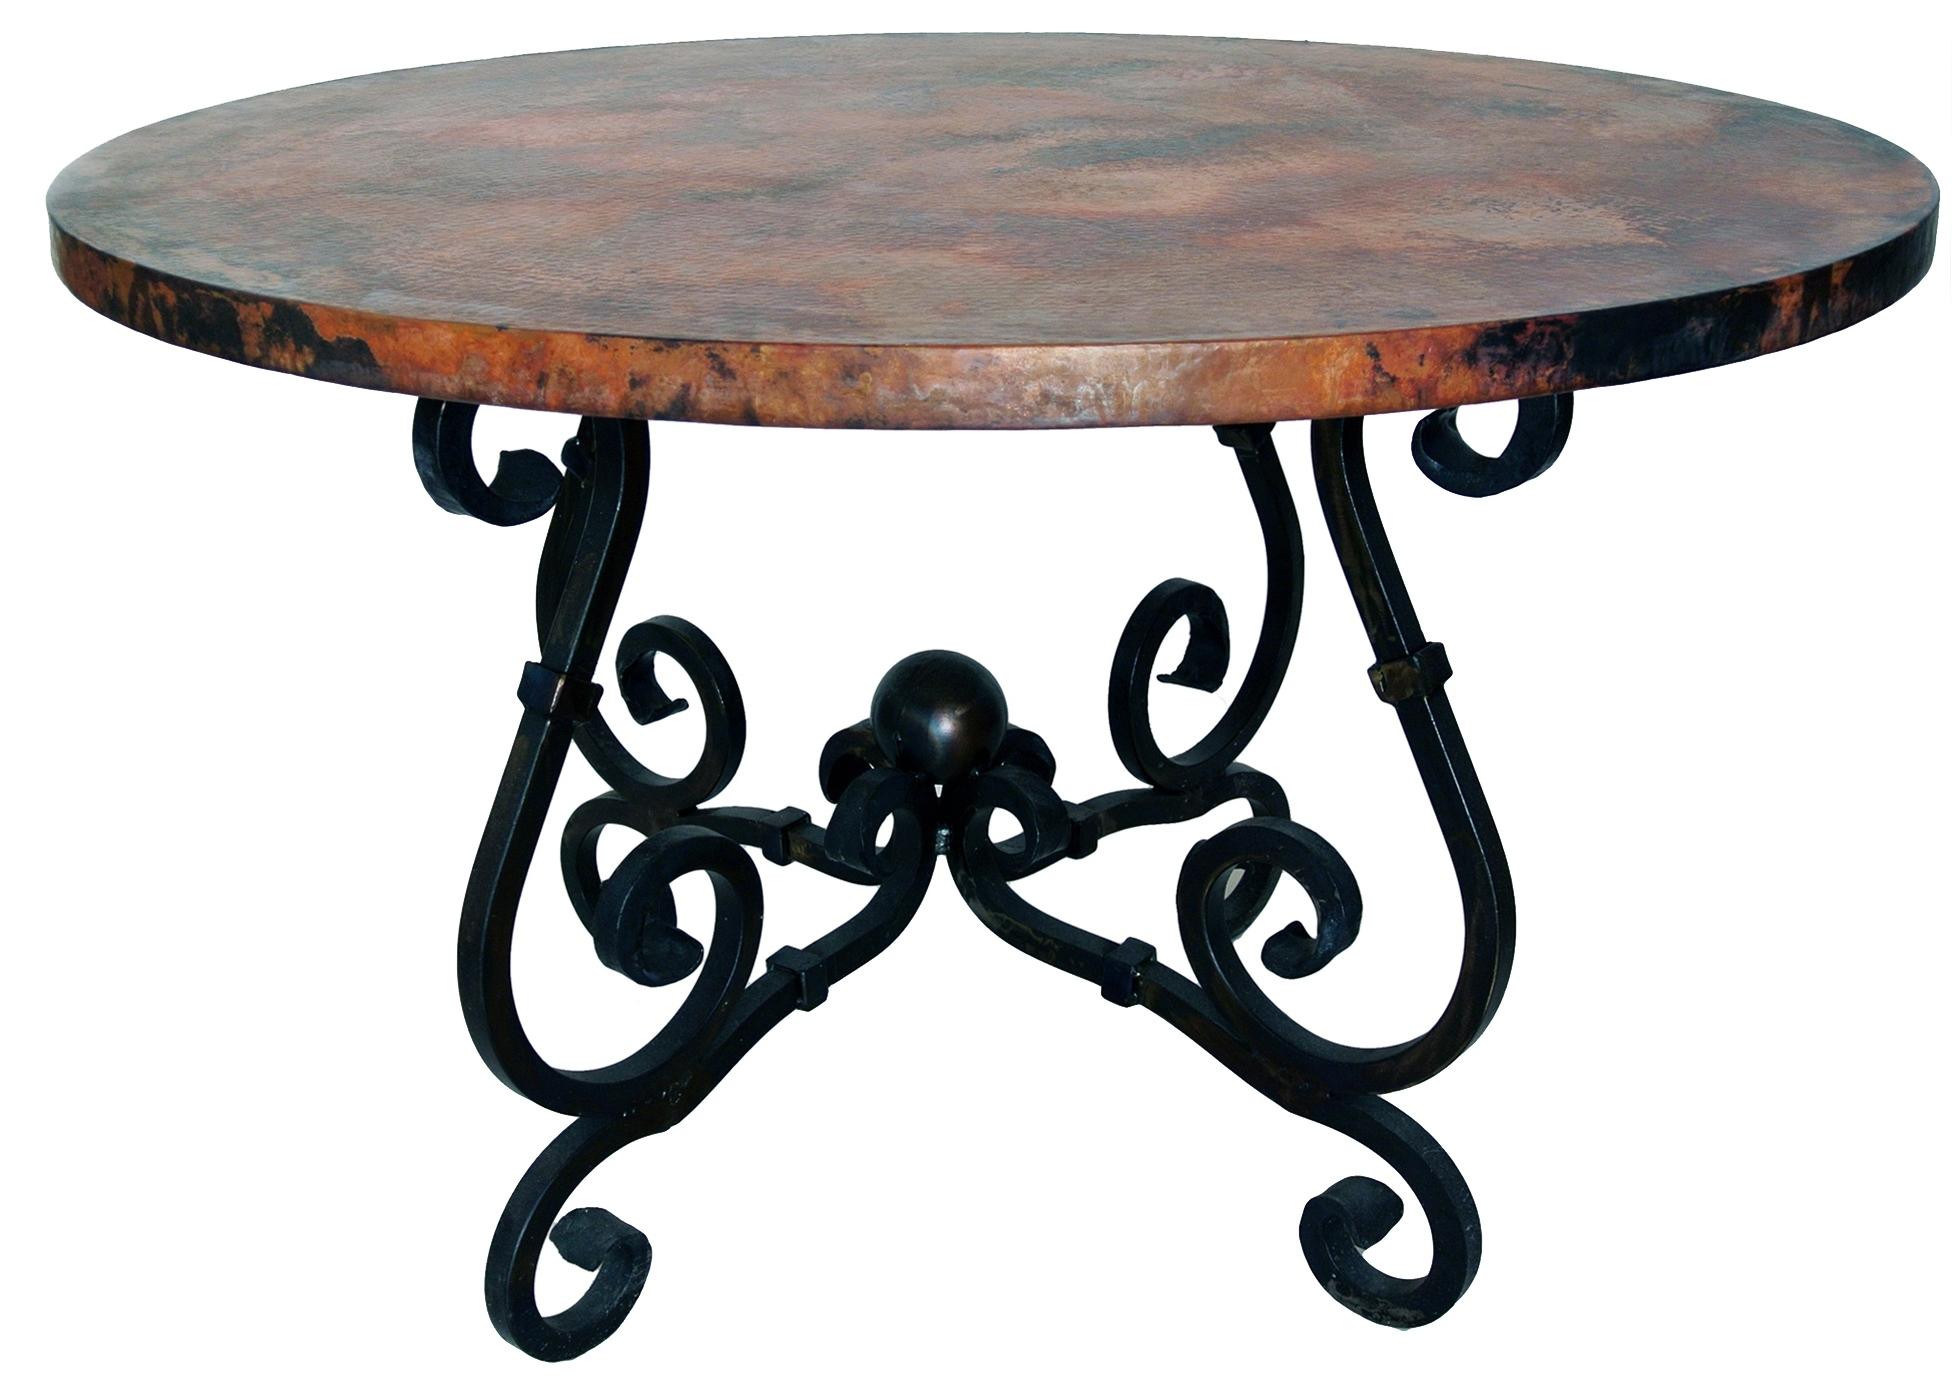 Stunning Copper & Wrought Iron Furniture by Prima ...